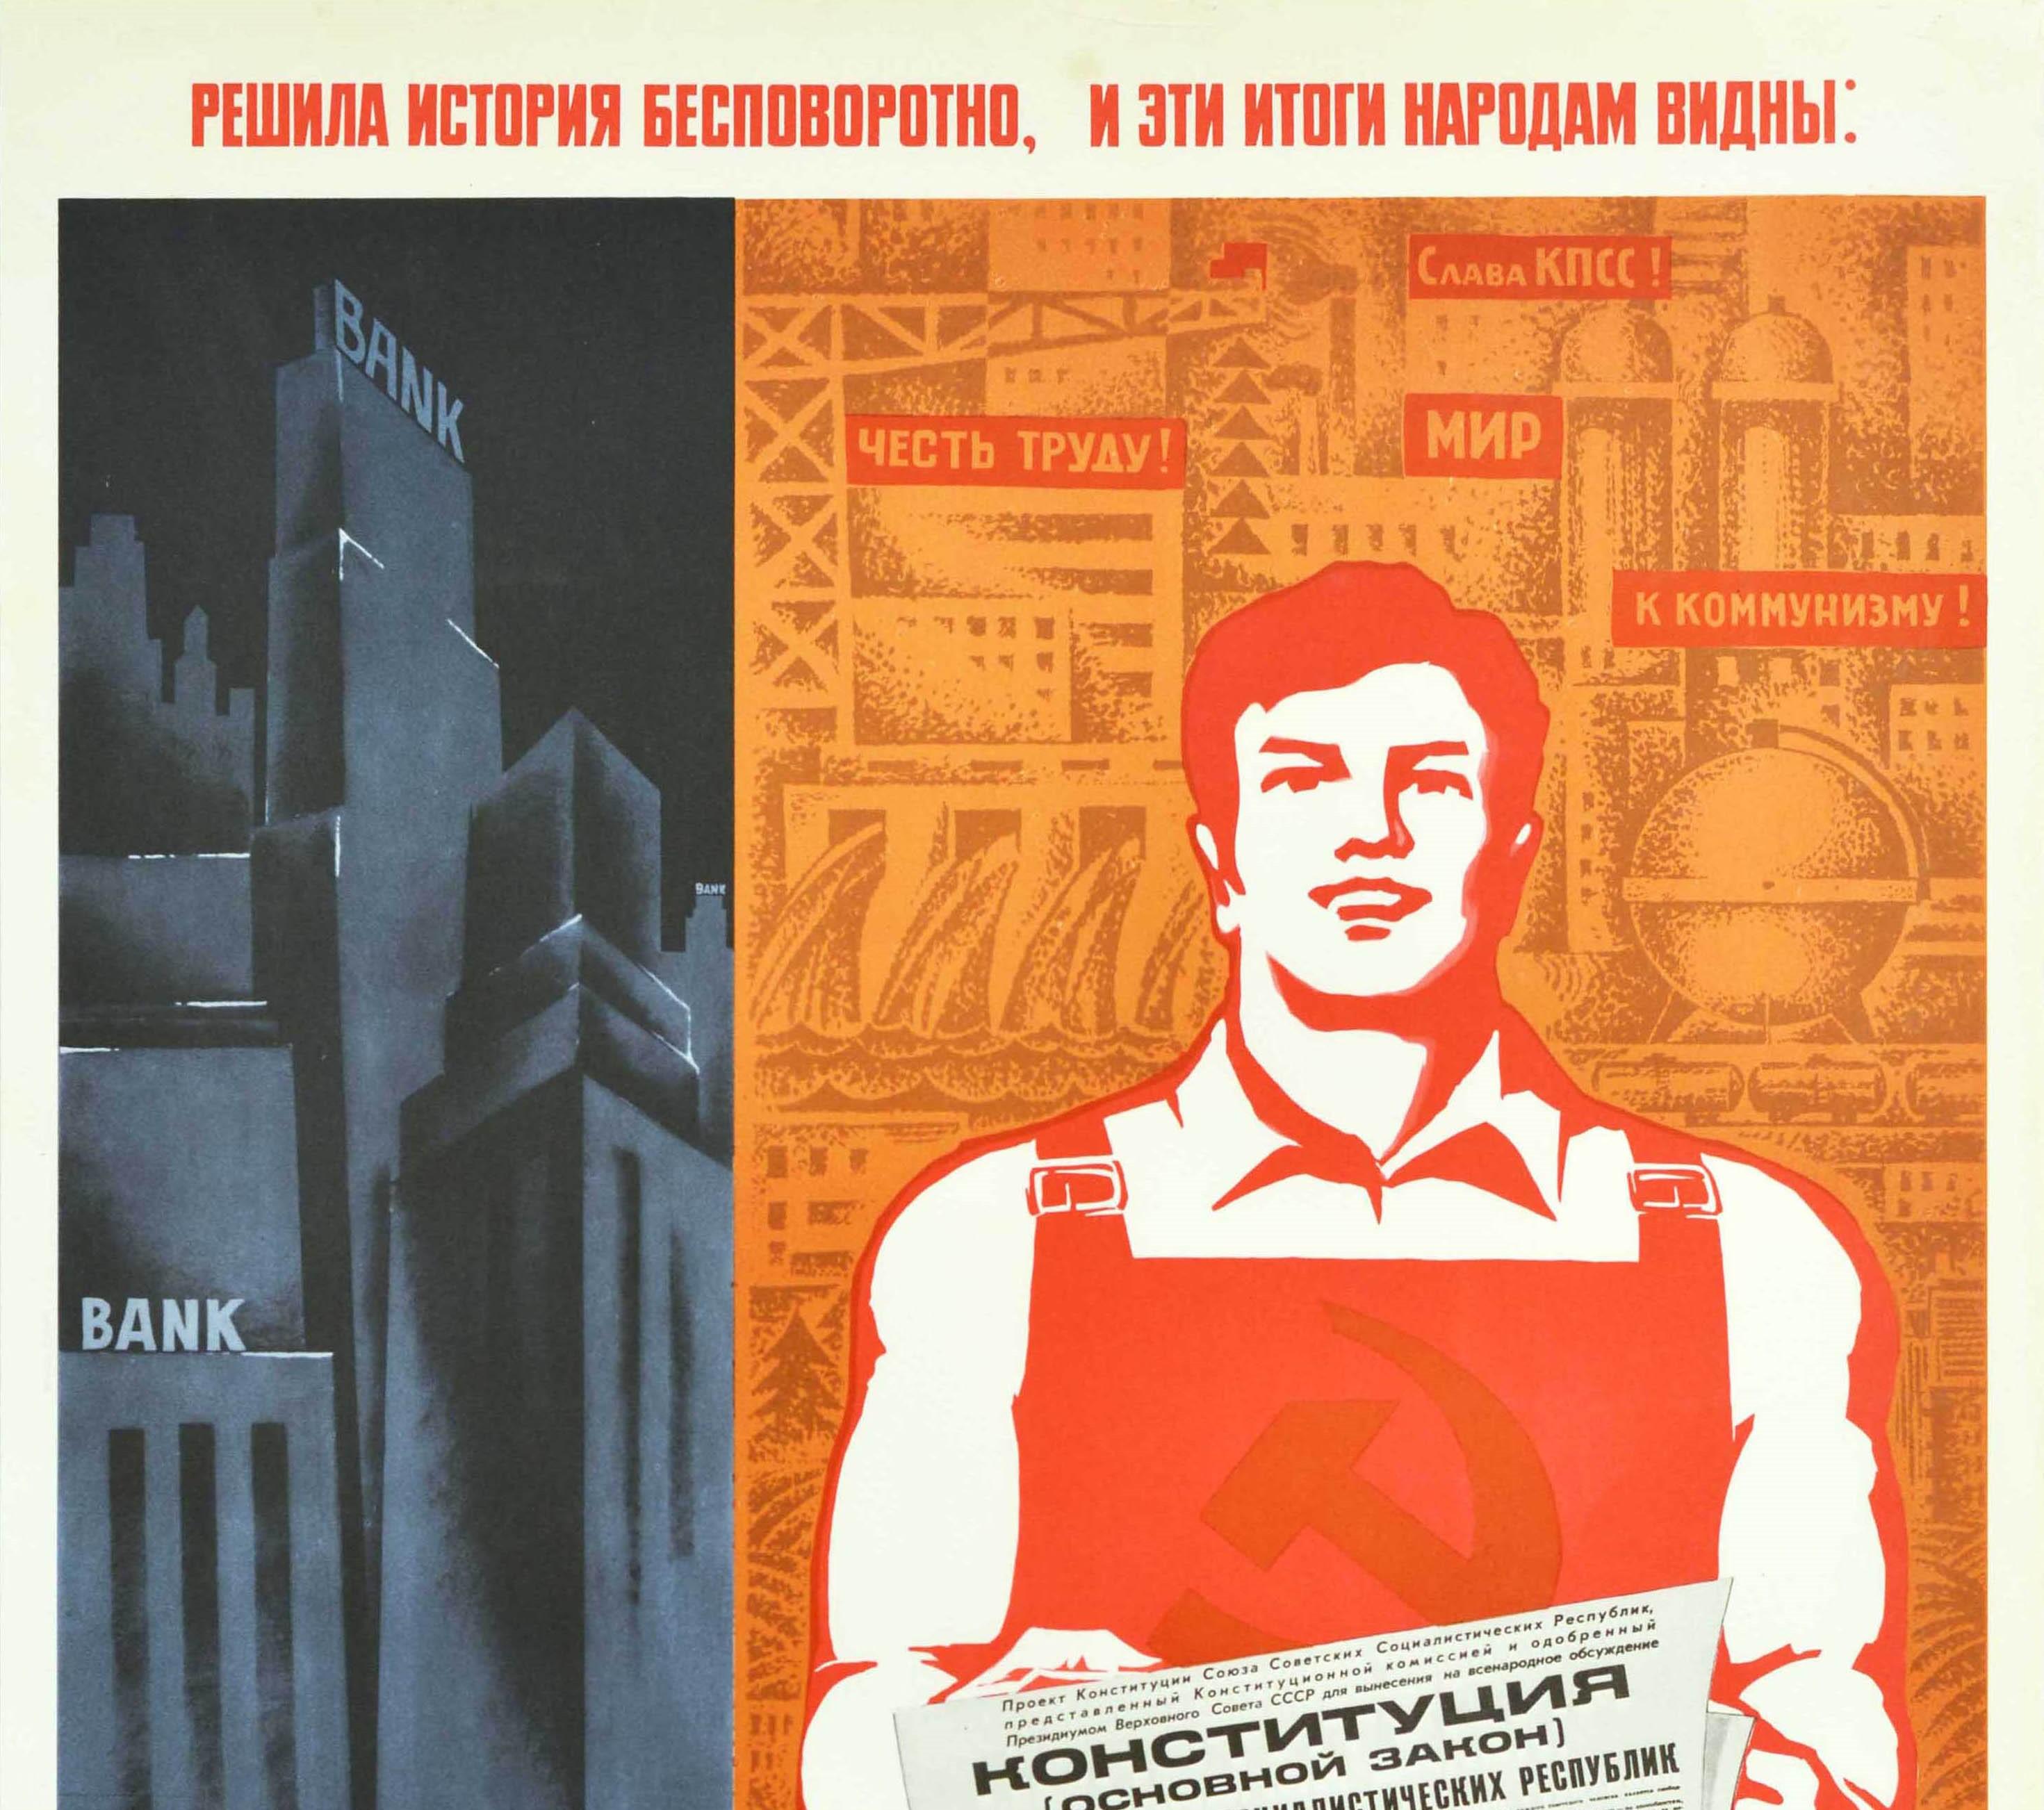 Original vintage Soviet propaganda poster featuring a dark shaded image on the left representing the West and Capitalism of a man out of work dwarfed by high rise buildings with the words Bank at the top, and a brighter image on the other side